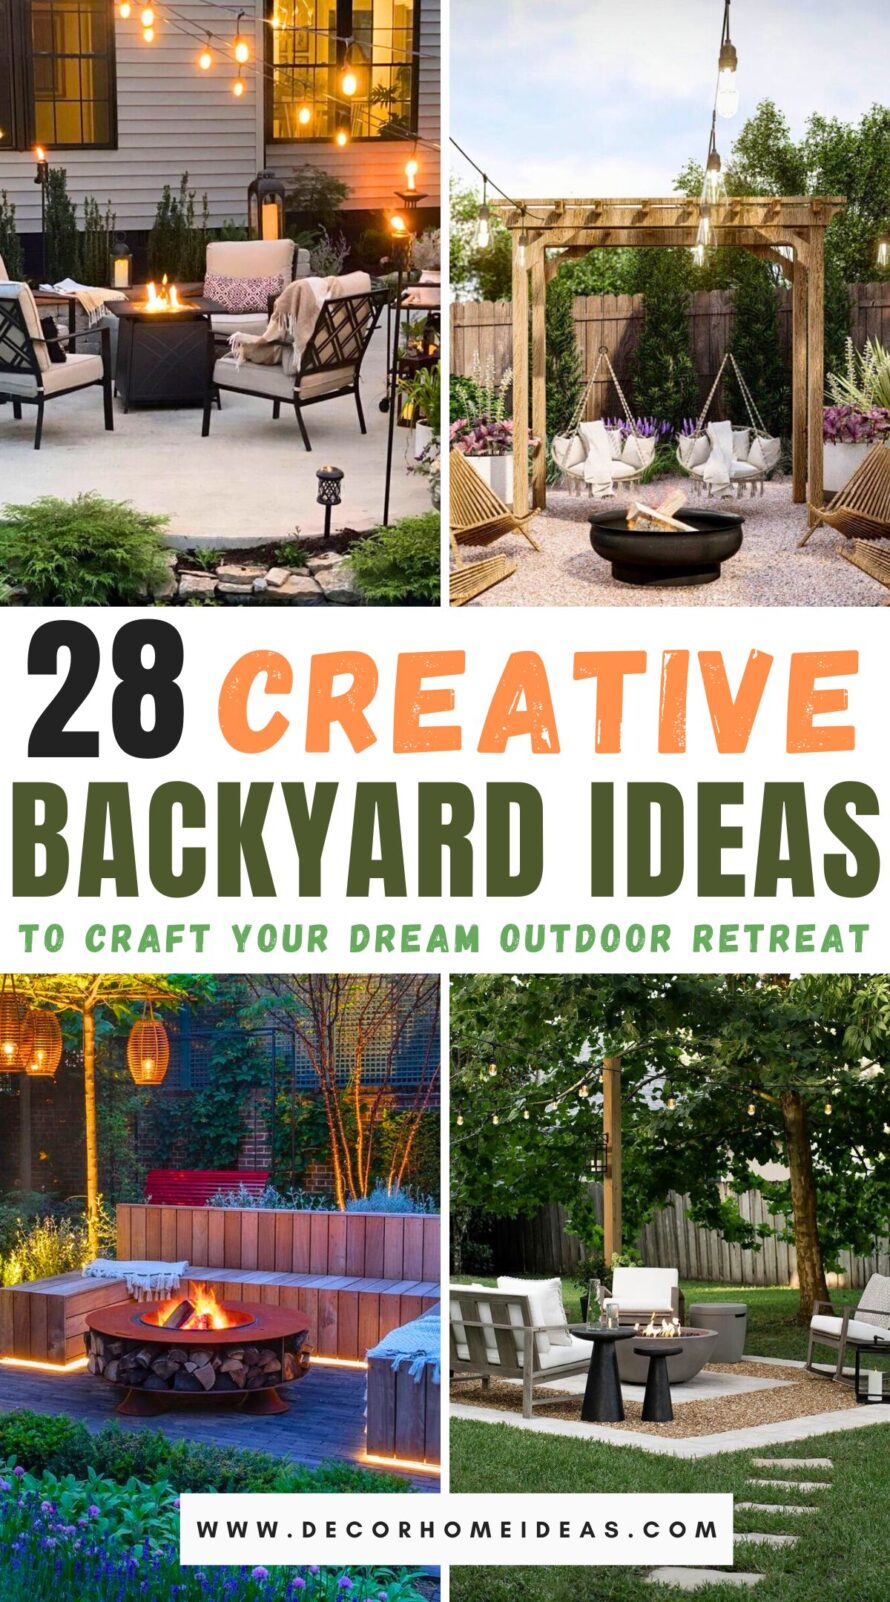 Explore 28 backyard ideas to create your own outdoor oasis. From cozy seating areas to vibrant gardens, discover ways to enhance your outdoor space for relaxation and entertainment.